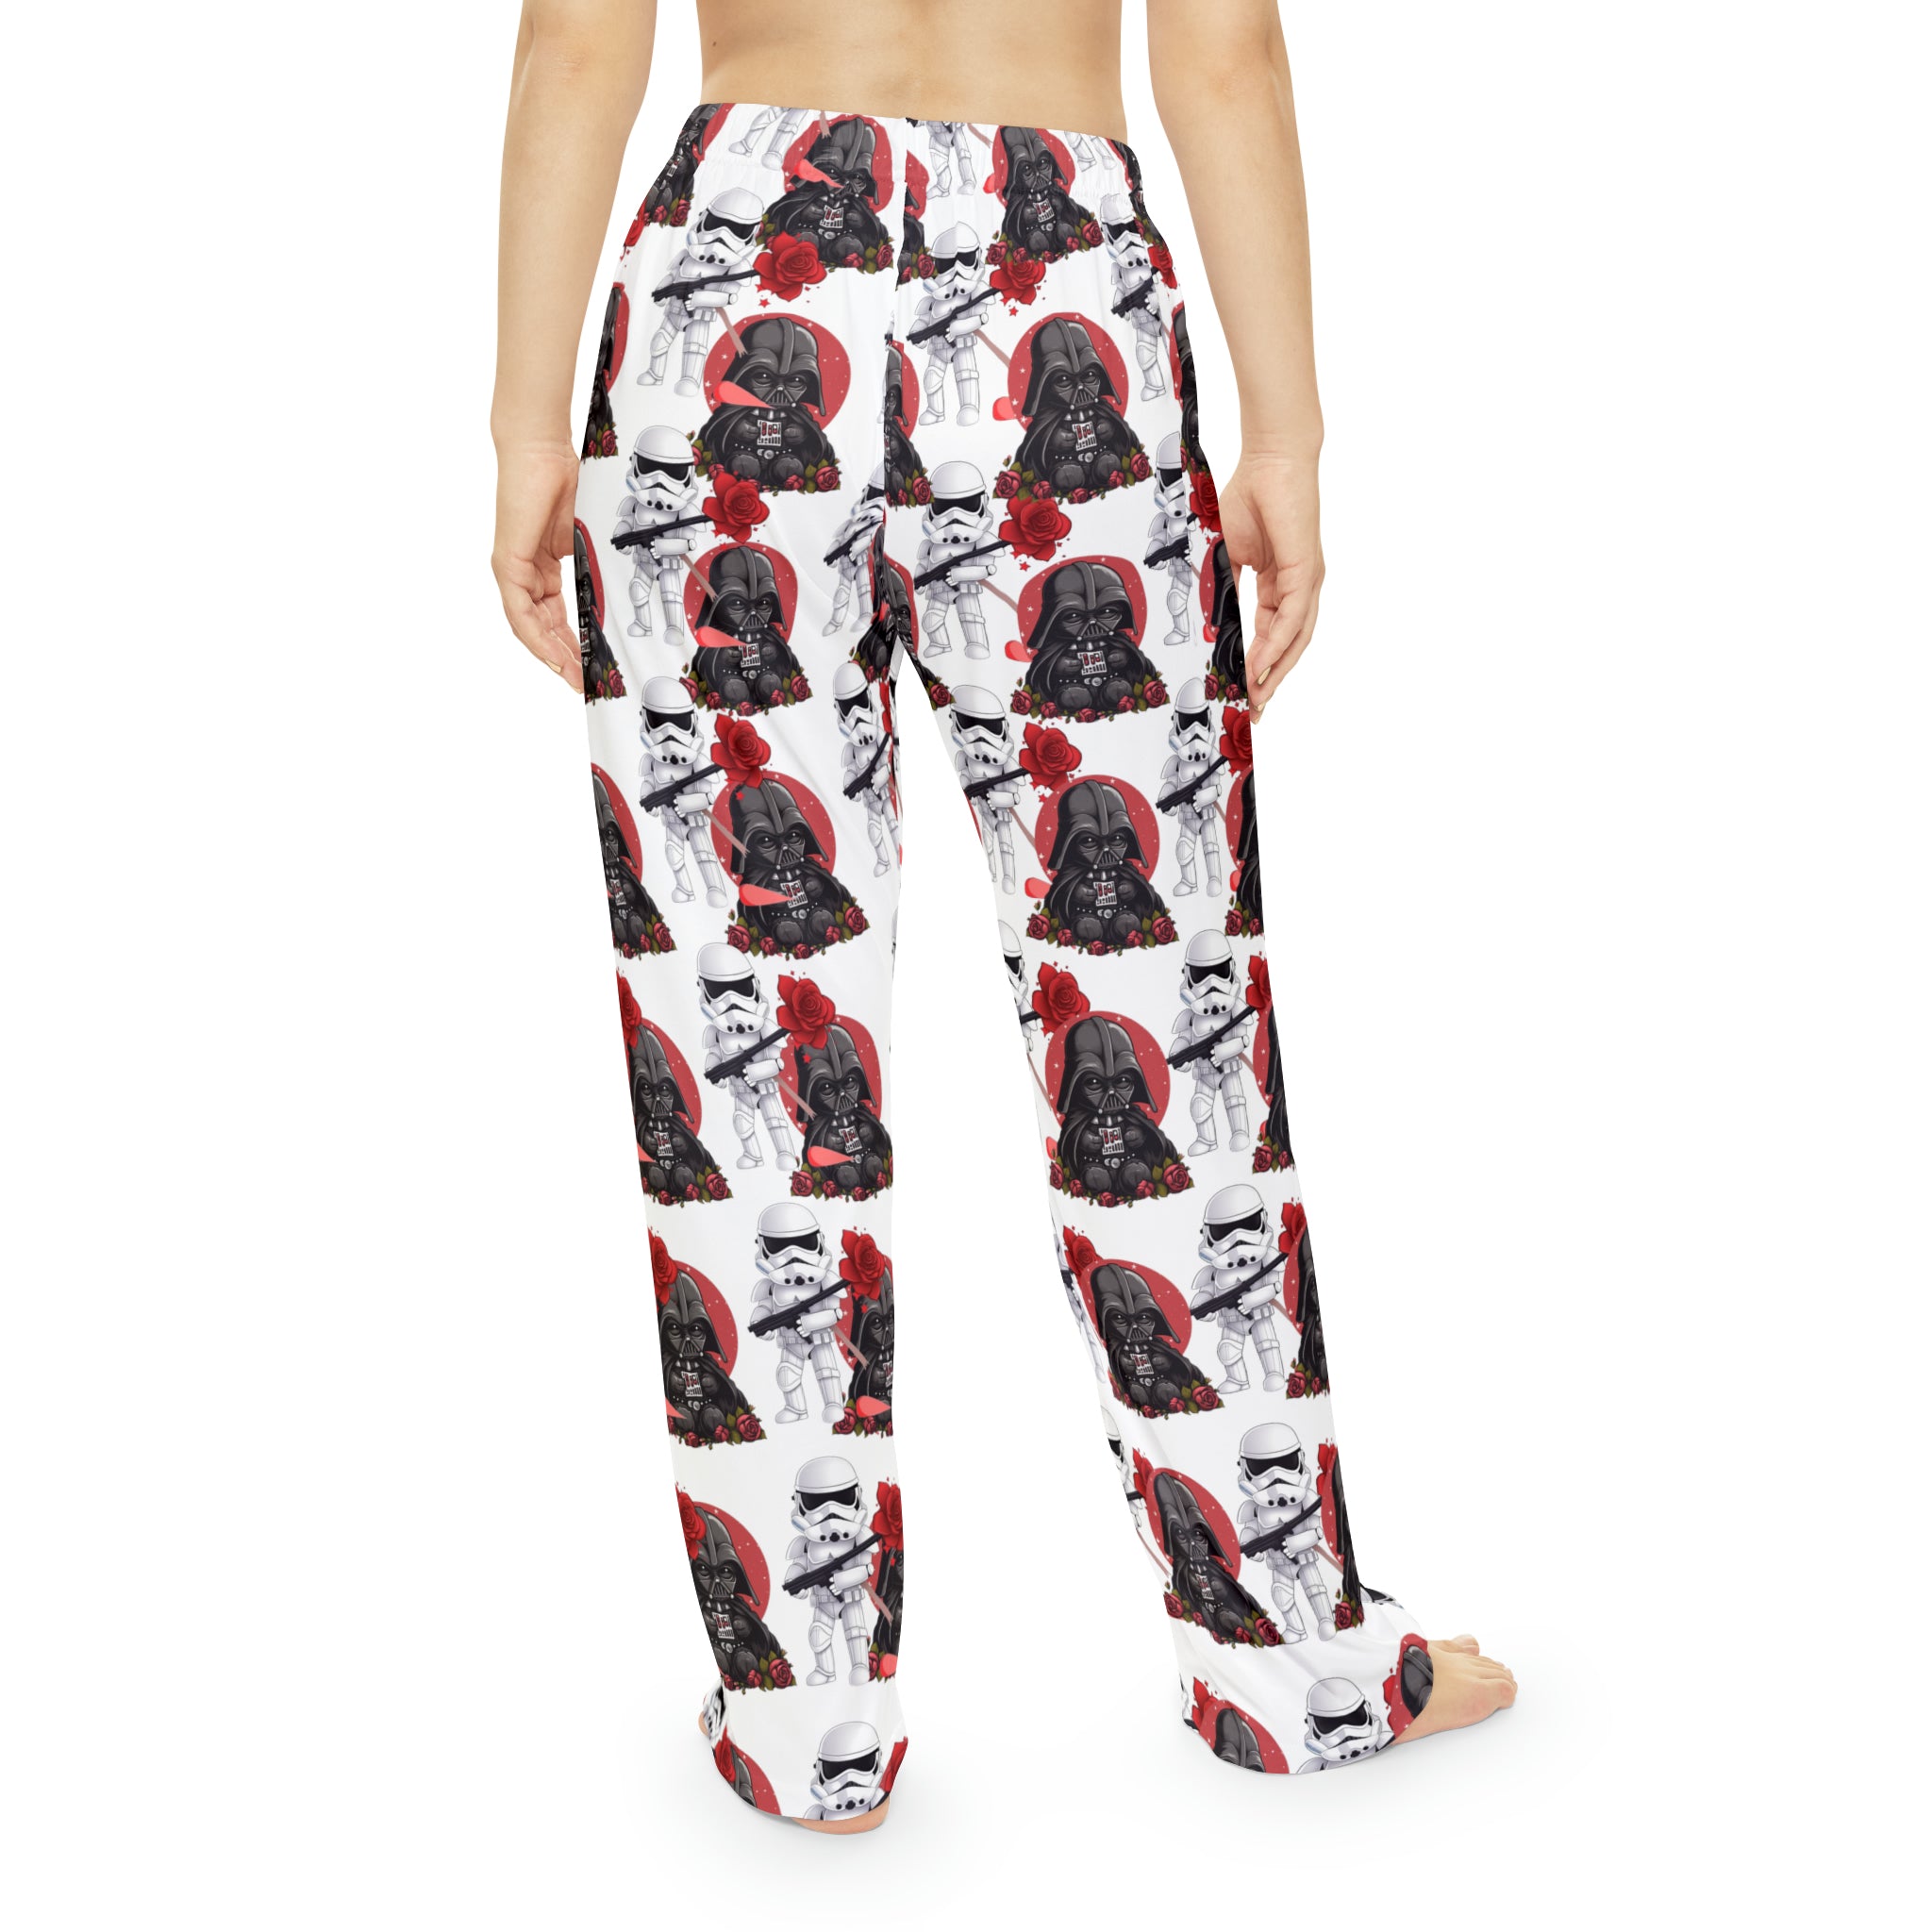 Add this to Your Original Trilogy Theme. Be Unique and Original. Trendy and Comfy Popular Iconic Galaxy Empire Women's Pajama Pants (AOP) - Perfect Loungewear Perfect for Watching Prequels or Trilogies